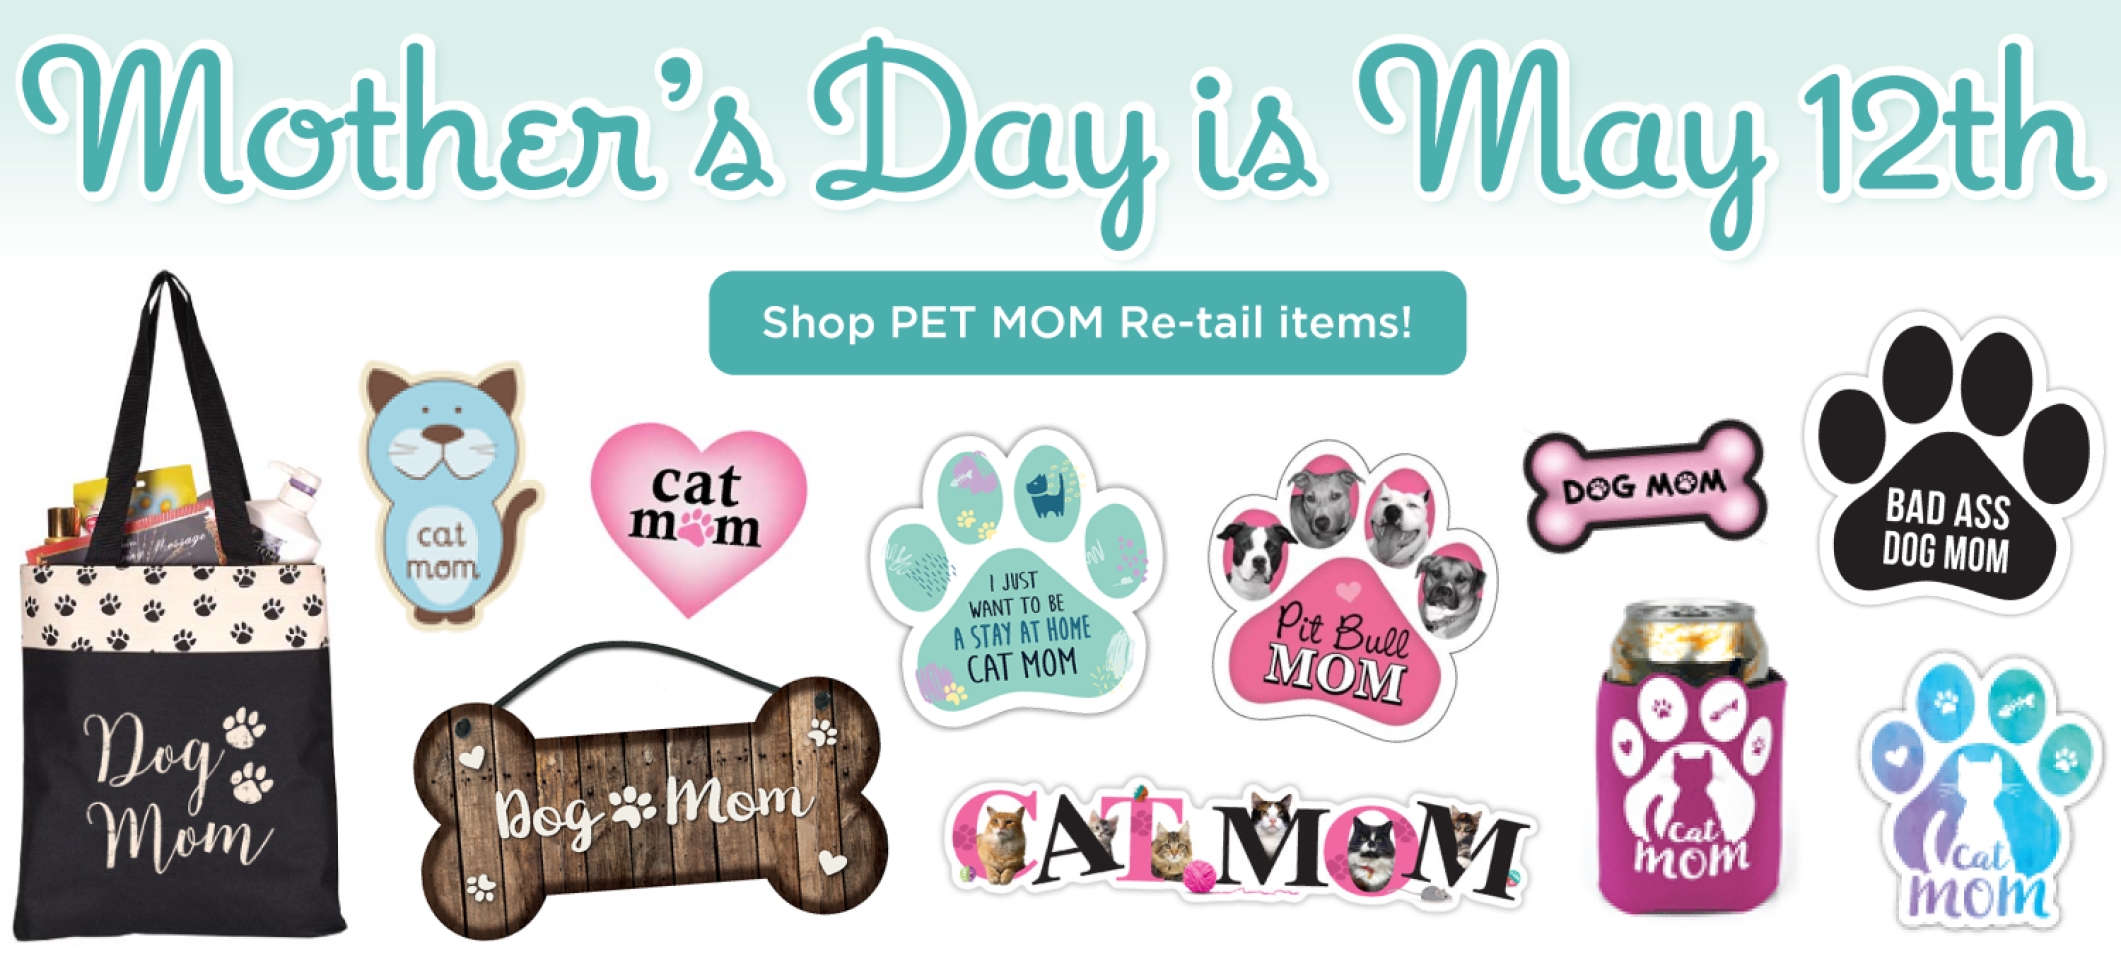 Pet Mom - Mothers Day